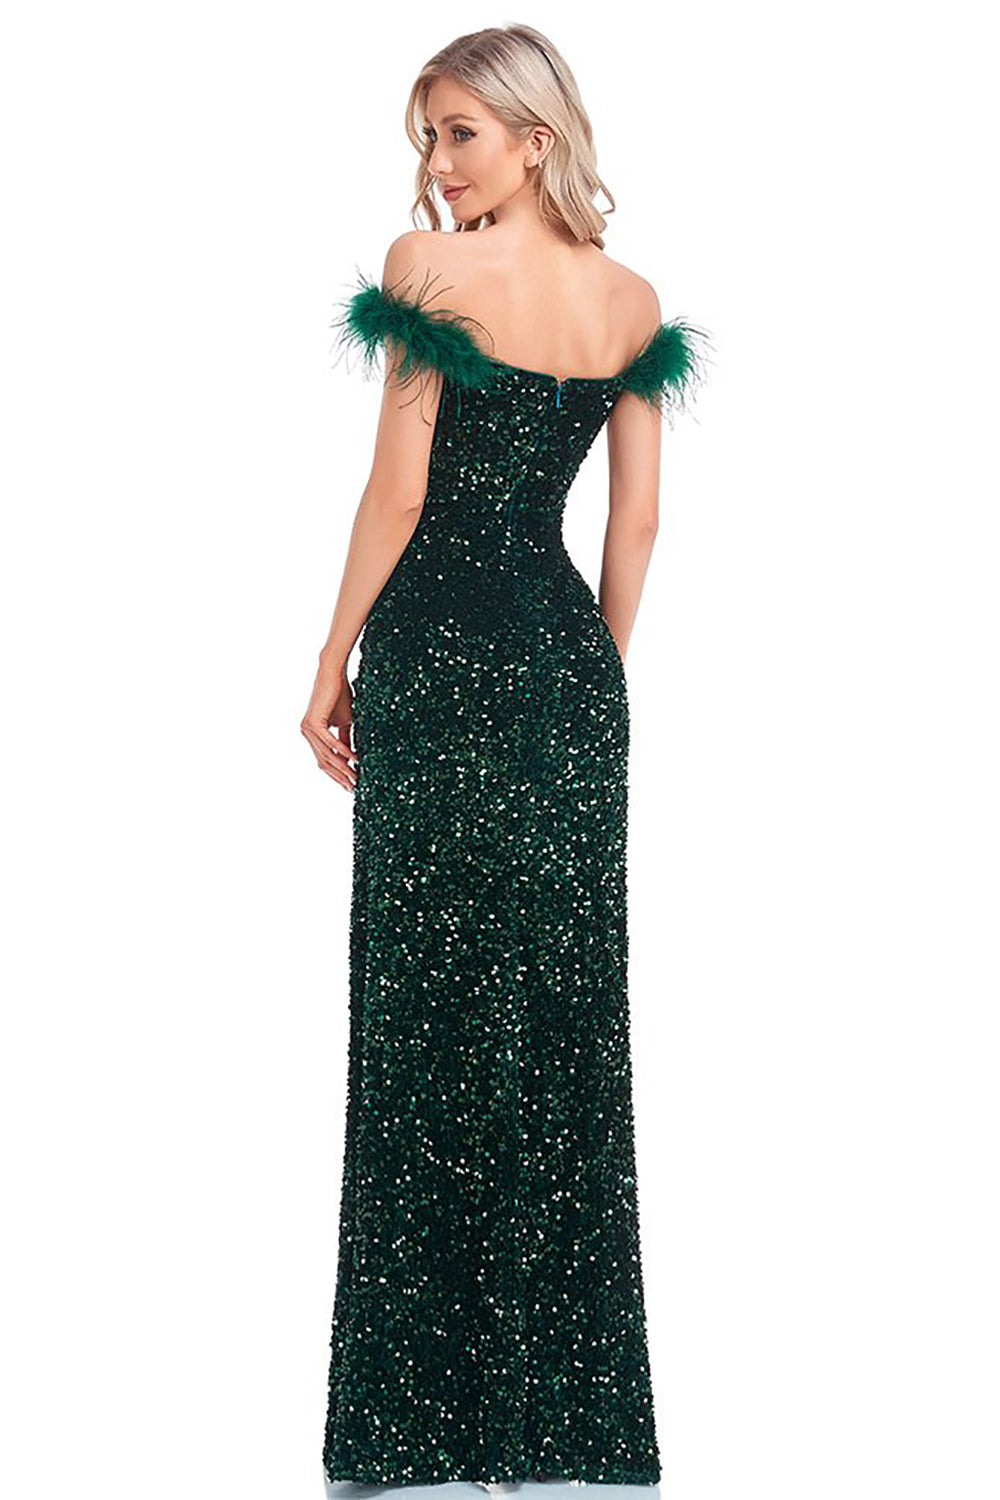 Sparkly Sequin Dark Green Mermaid Off the Shoulder Holiday Party Dress With Slit